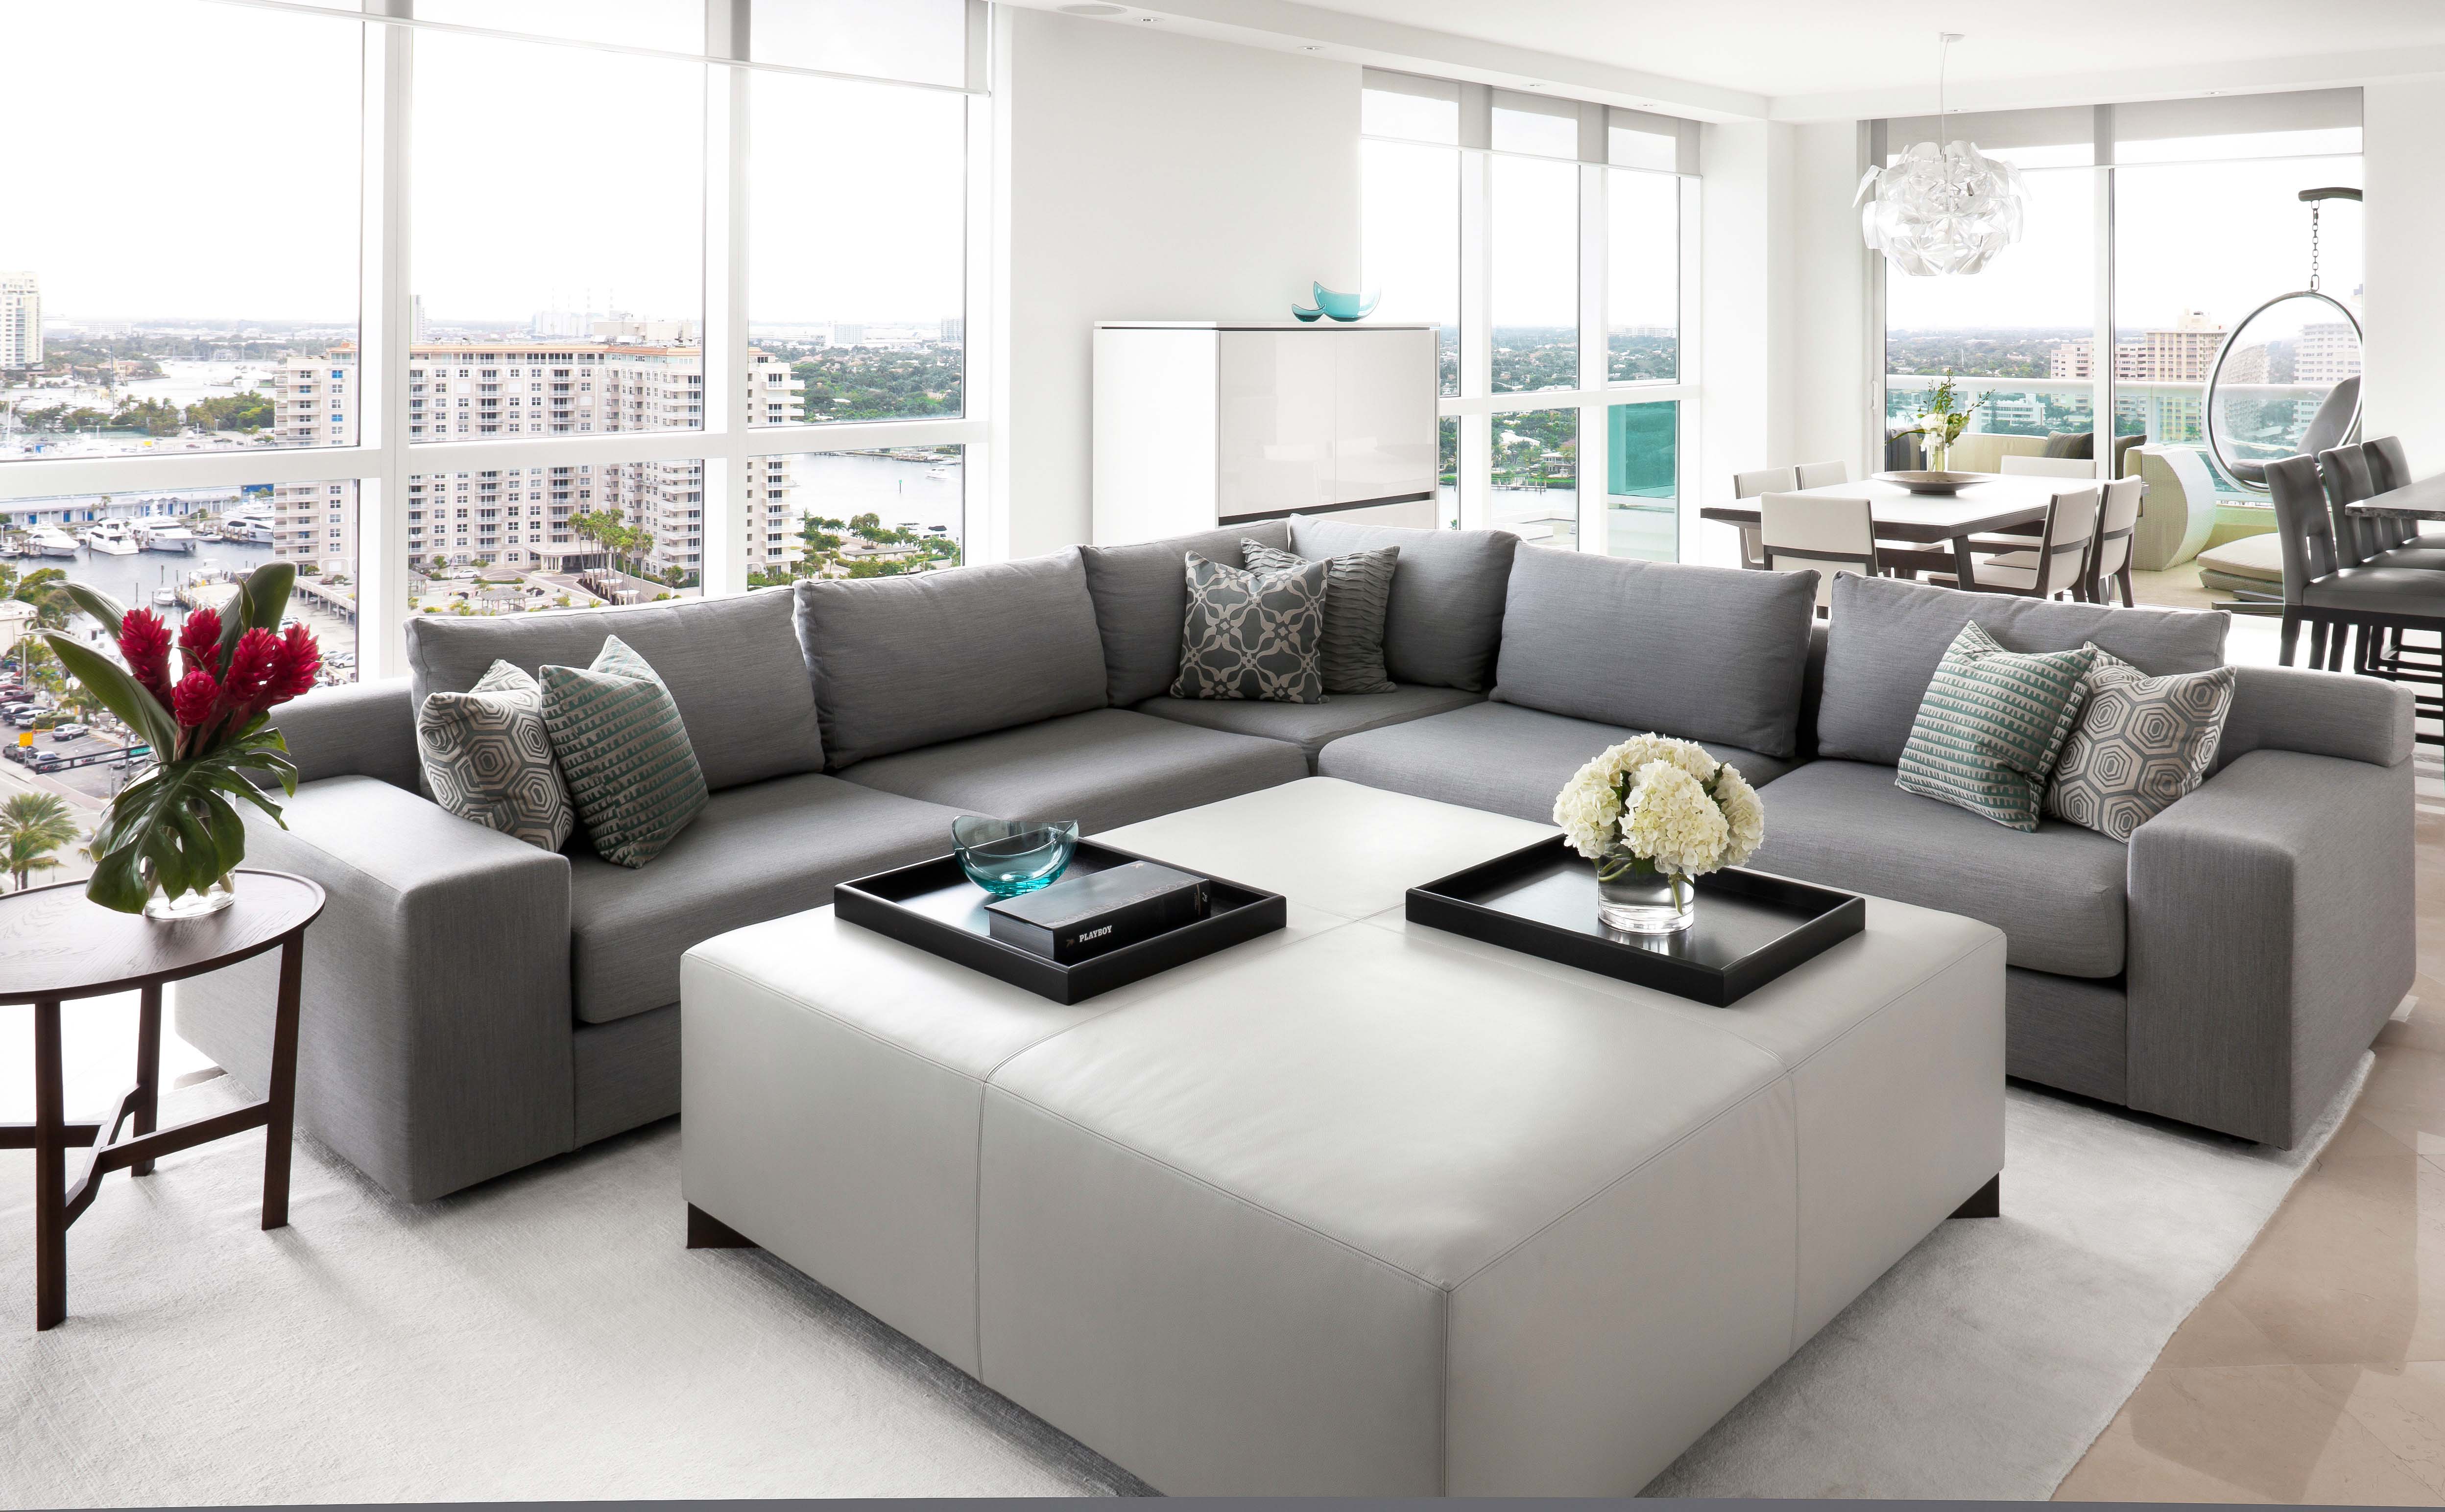 Furniture For Modern House With Neutral Color Schemes In Modern Grey Sectional Sofa For Living Room Furniture Also Large Square Fabric Coffee Table With Rug Area 